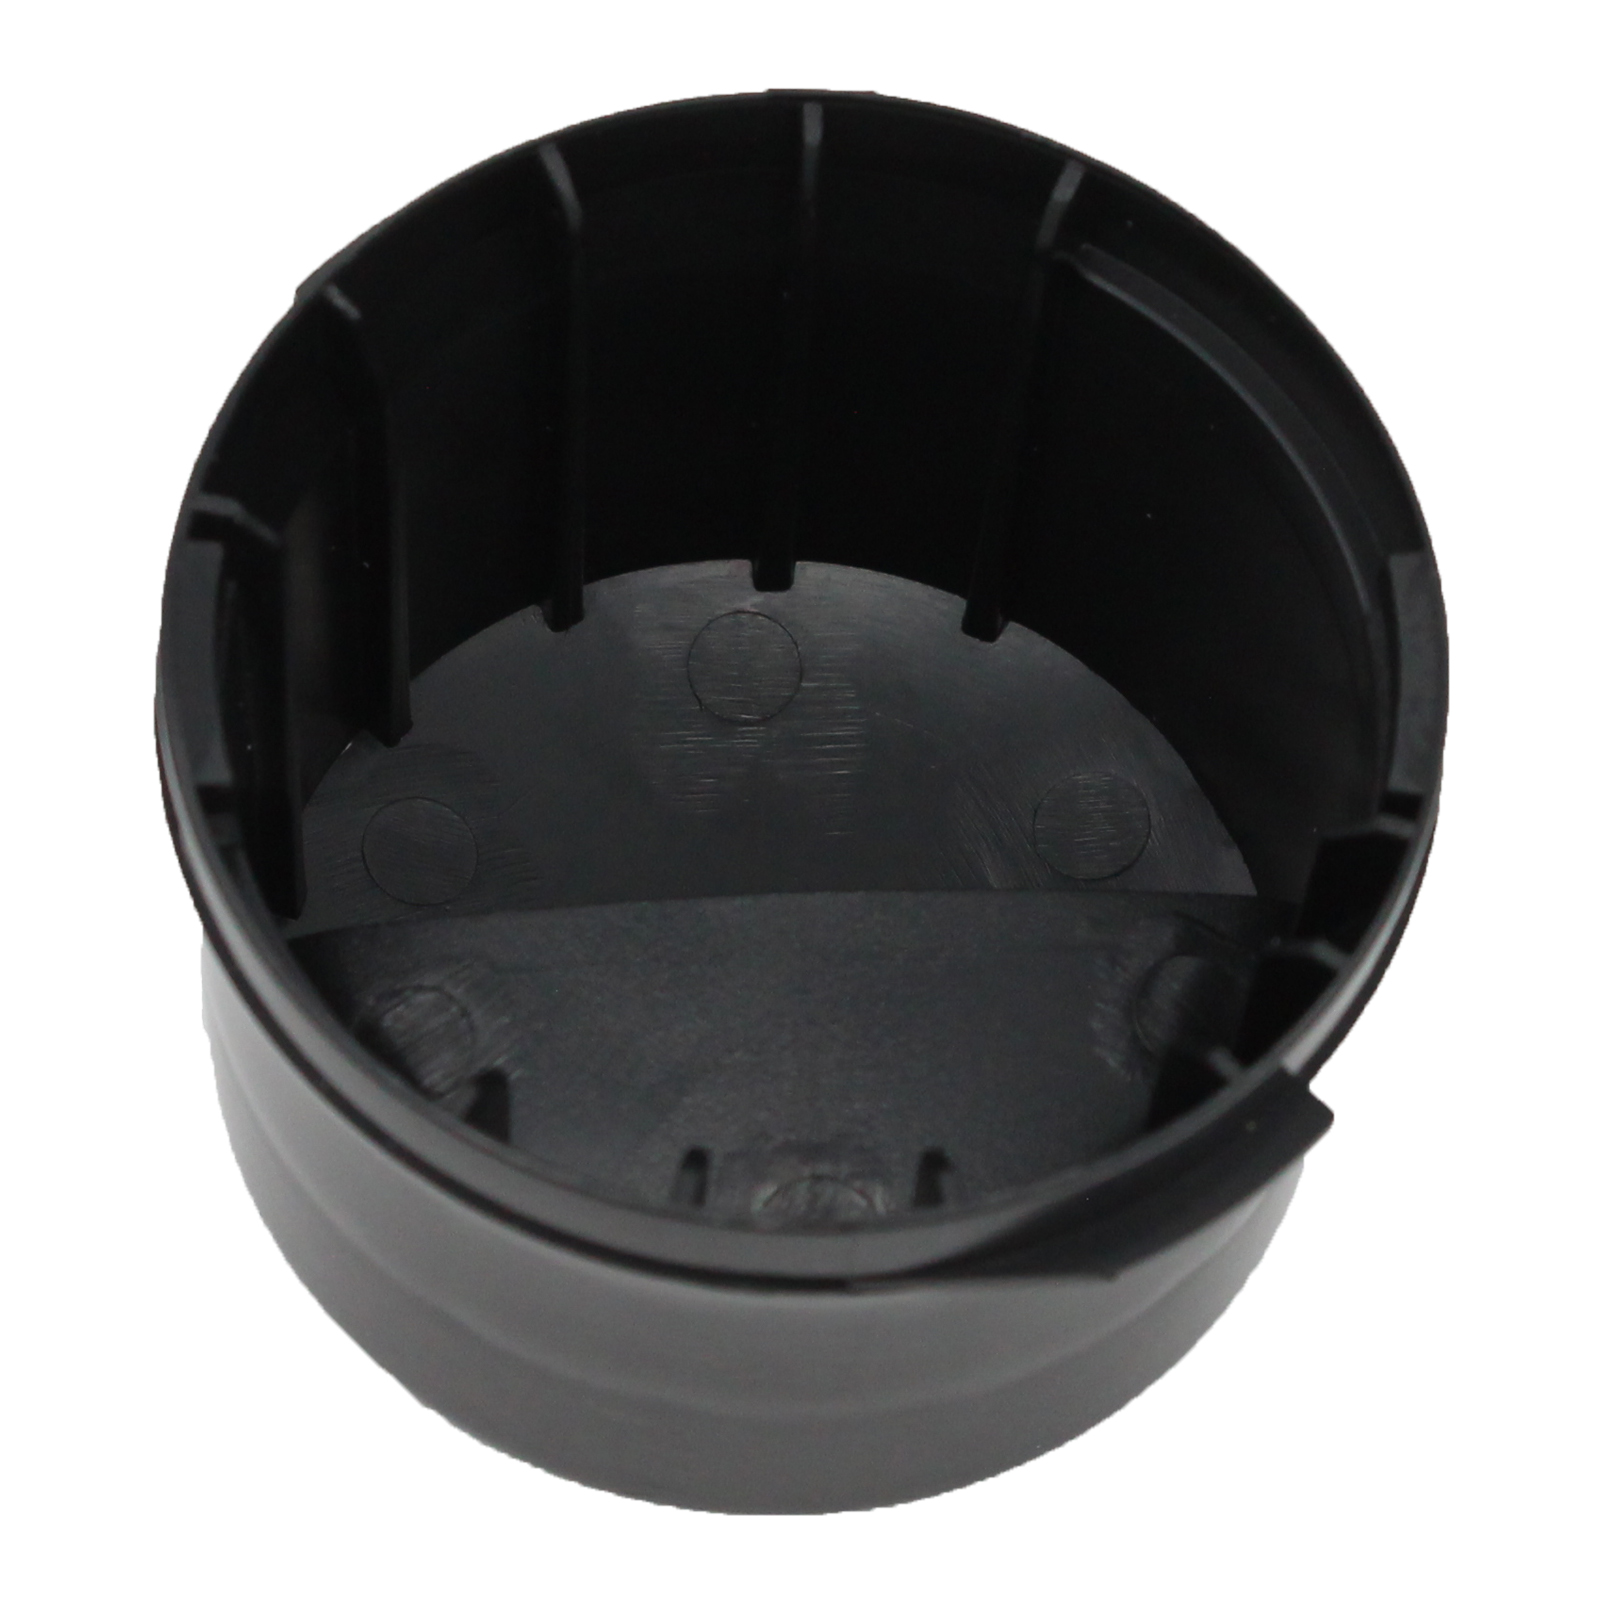 2260502B Refrigerator Water Filter Cap Replacement for Kenmore / Sears 10656533400 Refrigerator - Compatible with WP2260518B Black Water Filter Cap - UpStart Components Brand - image 4 of 4